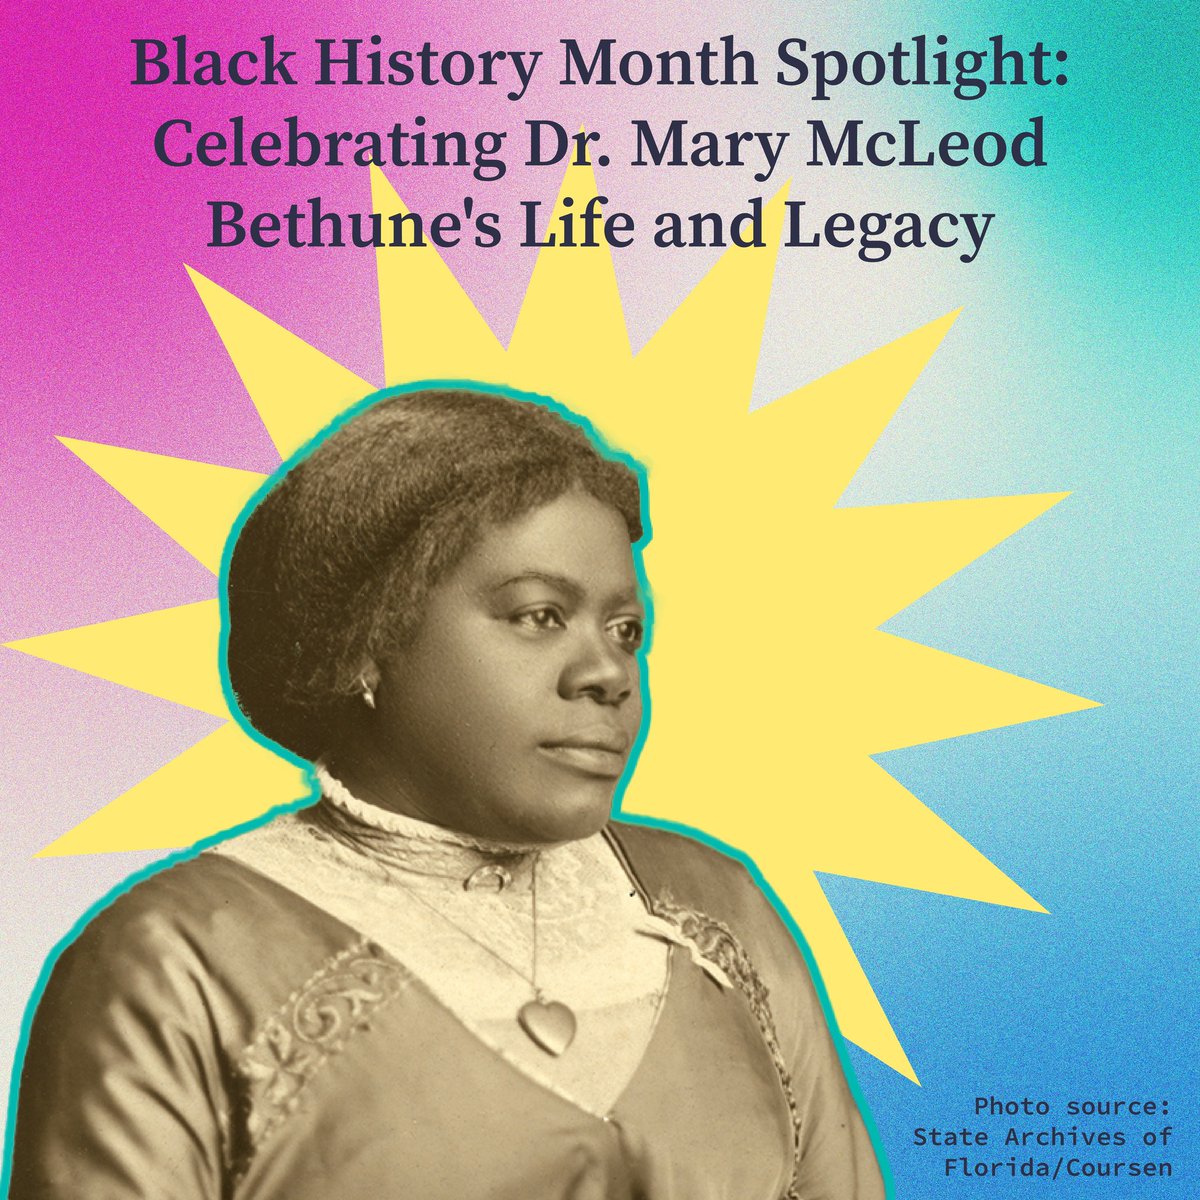 “My philosophy of education is the basic principle upon which my life has been built...that is the three-fold training of head, hand, heart.' - Dr. Mary McLeod Bethune, leader in the fight for civil rights & education #BlackHistoryMonth #FloridaHistory floridapolicy.org/posts/black-hi…